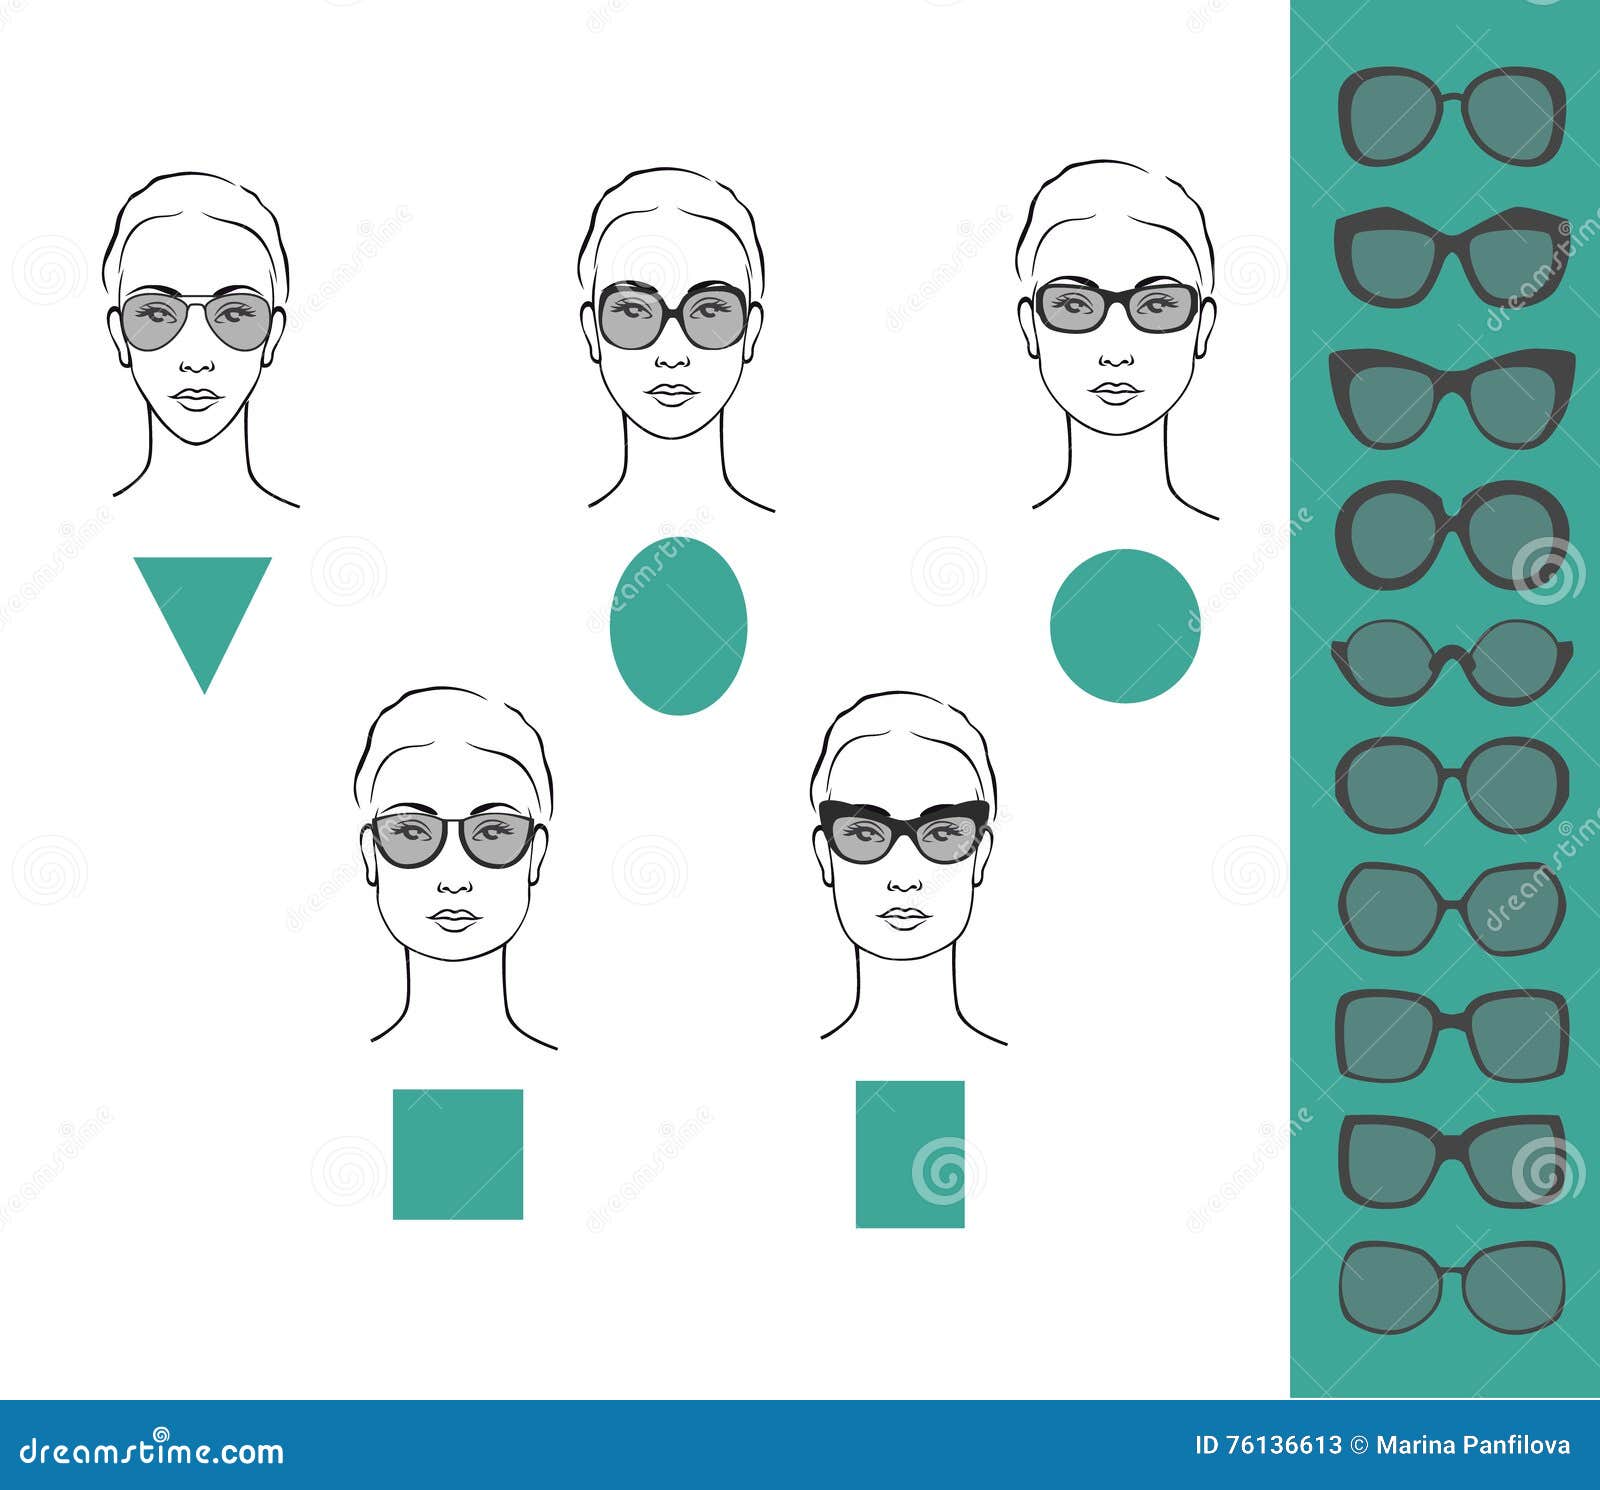 How to find the best sunglasses for your face shape - Mia Burton